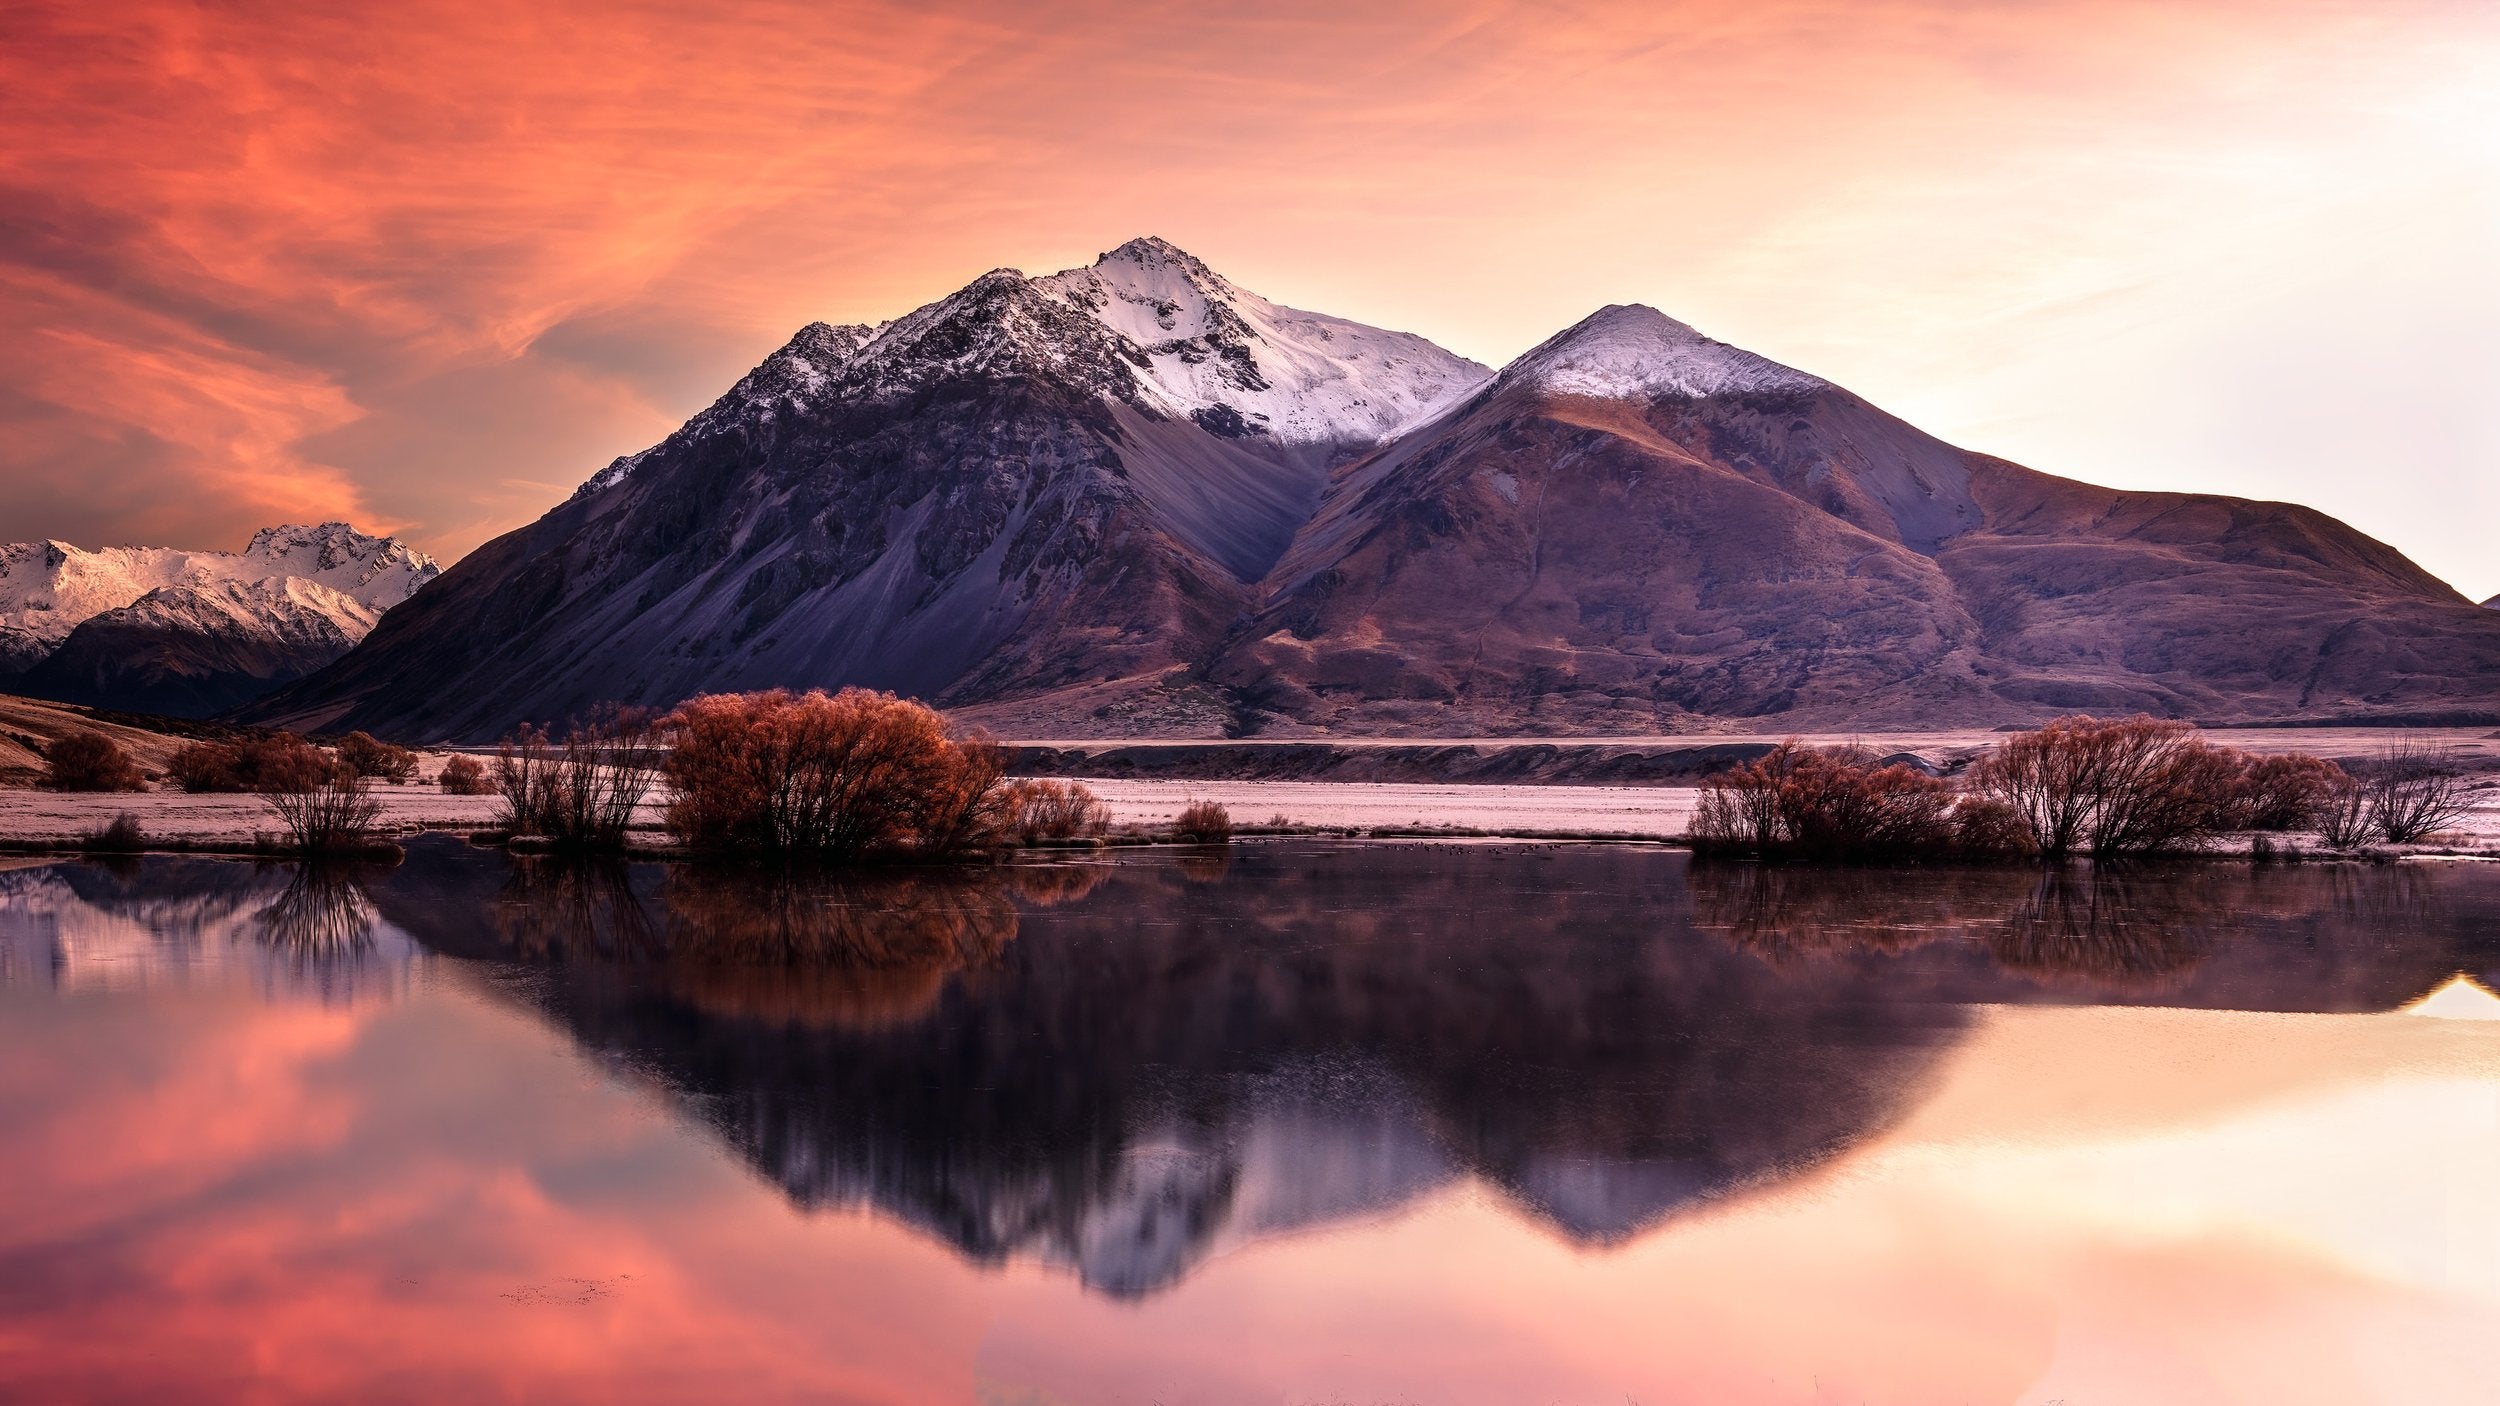 Mountains with an orange sunset and lake reflection.